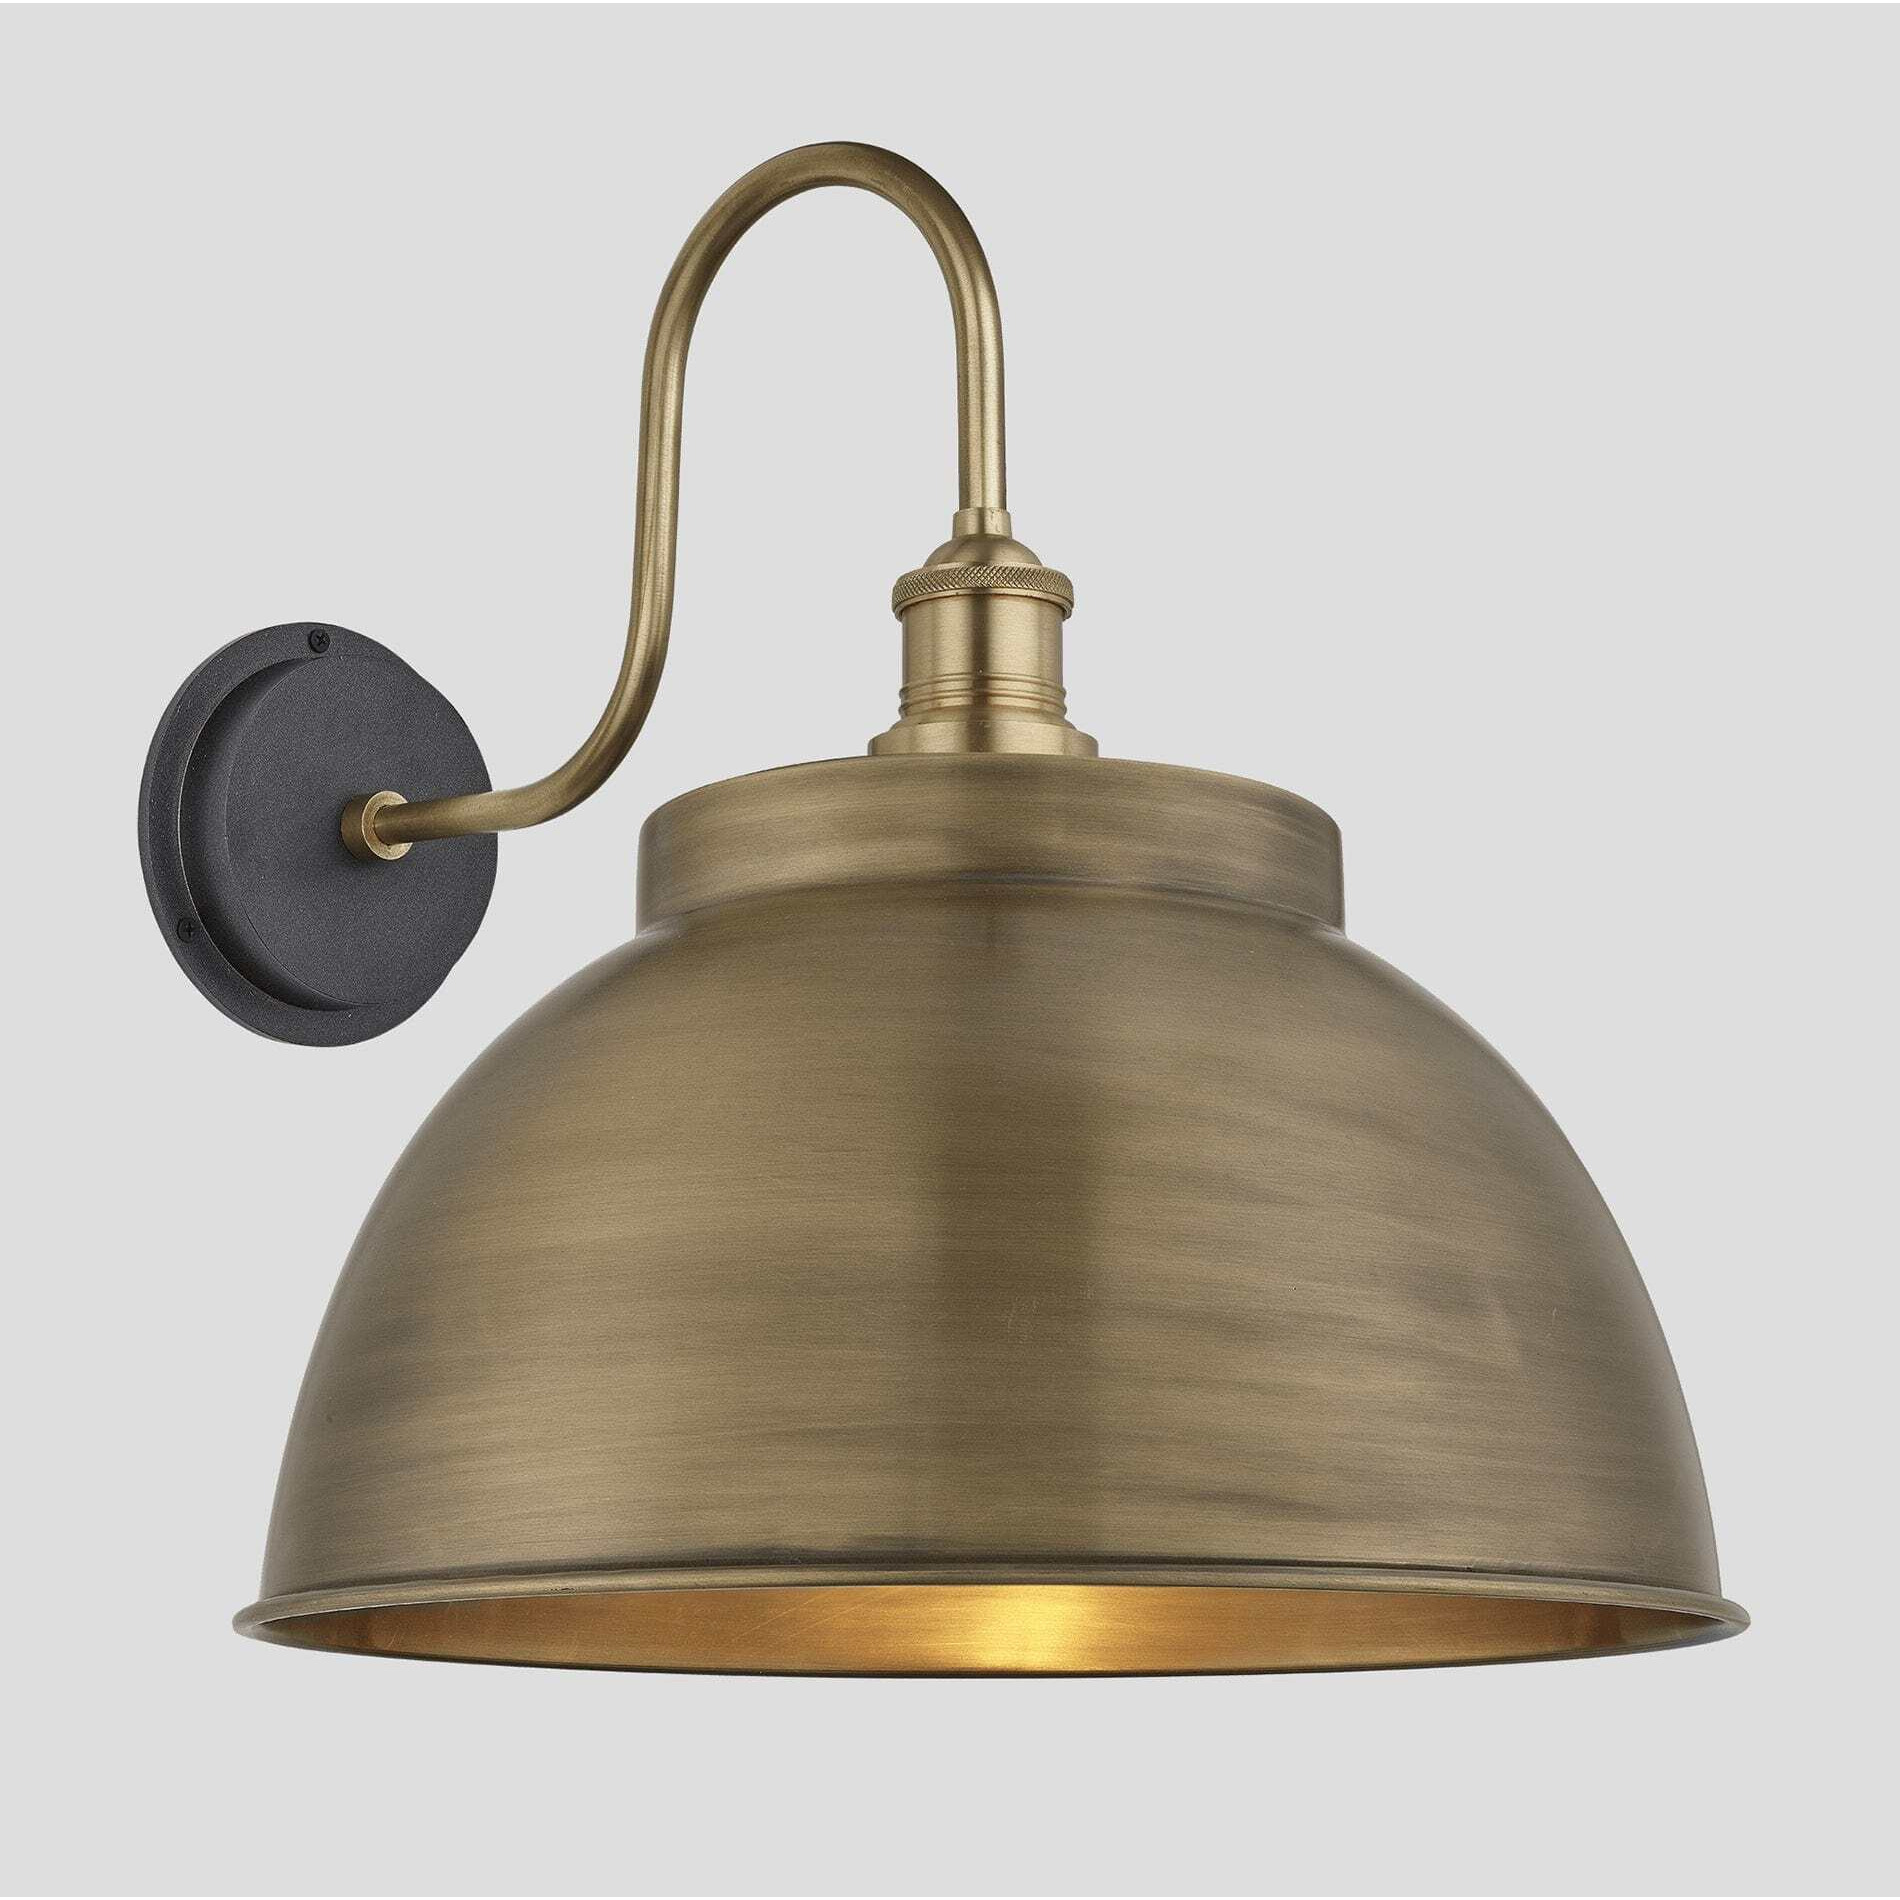 Swan Neck Outdoor & Bathroom Dome Wall Light - 17 Inch - Brass - Pre-order - Expected w/c 13th of May